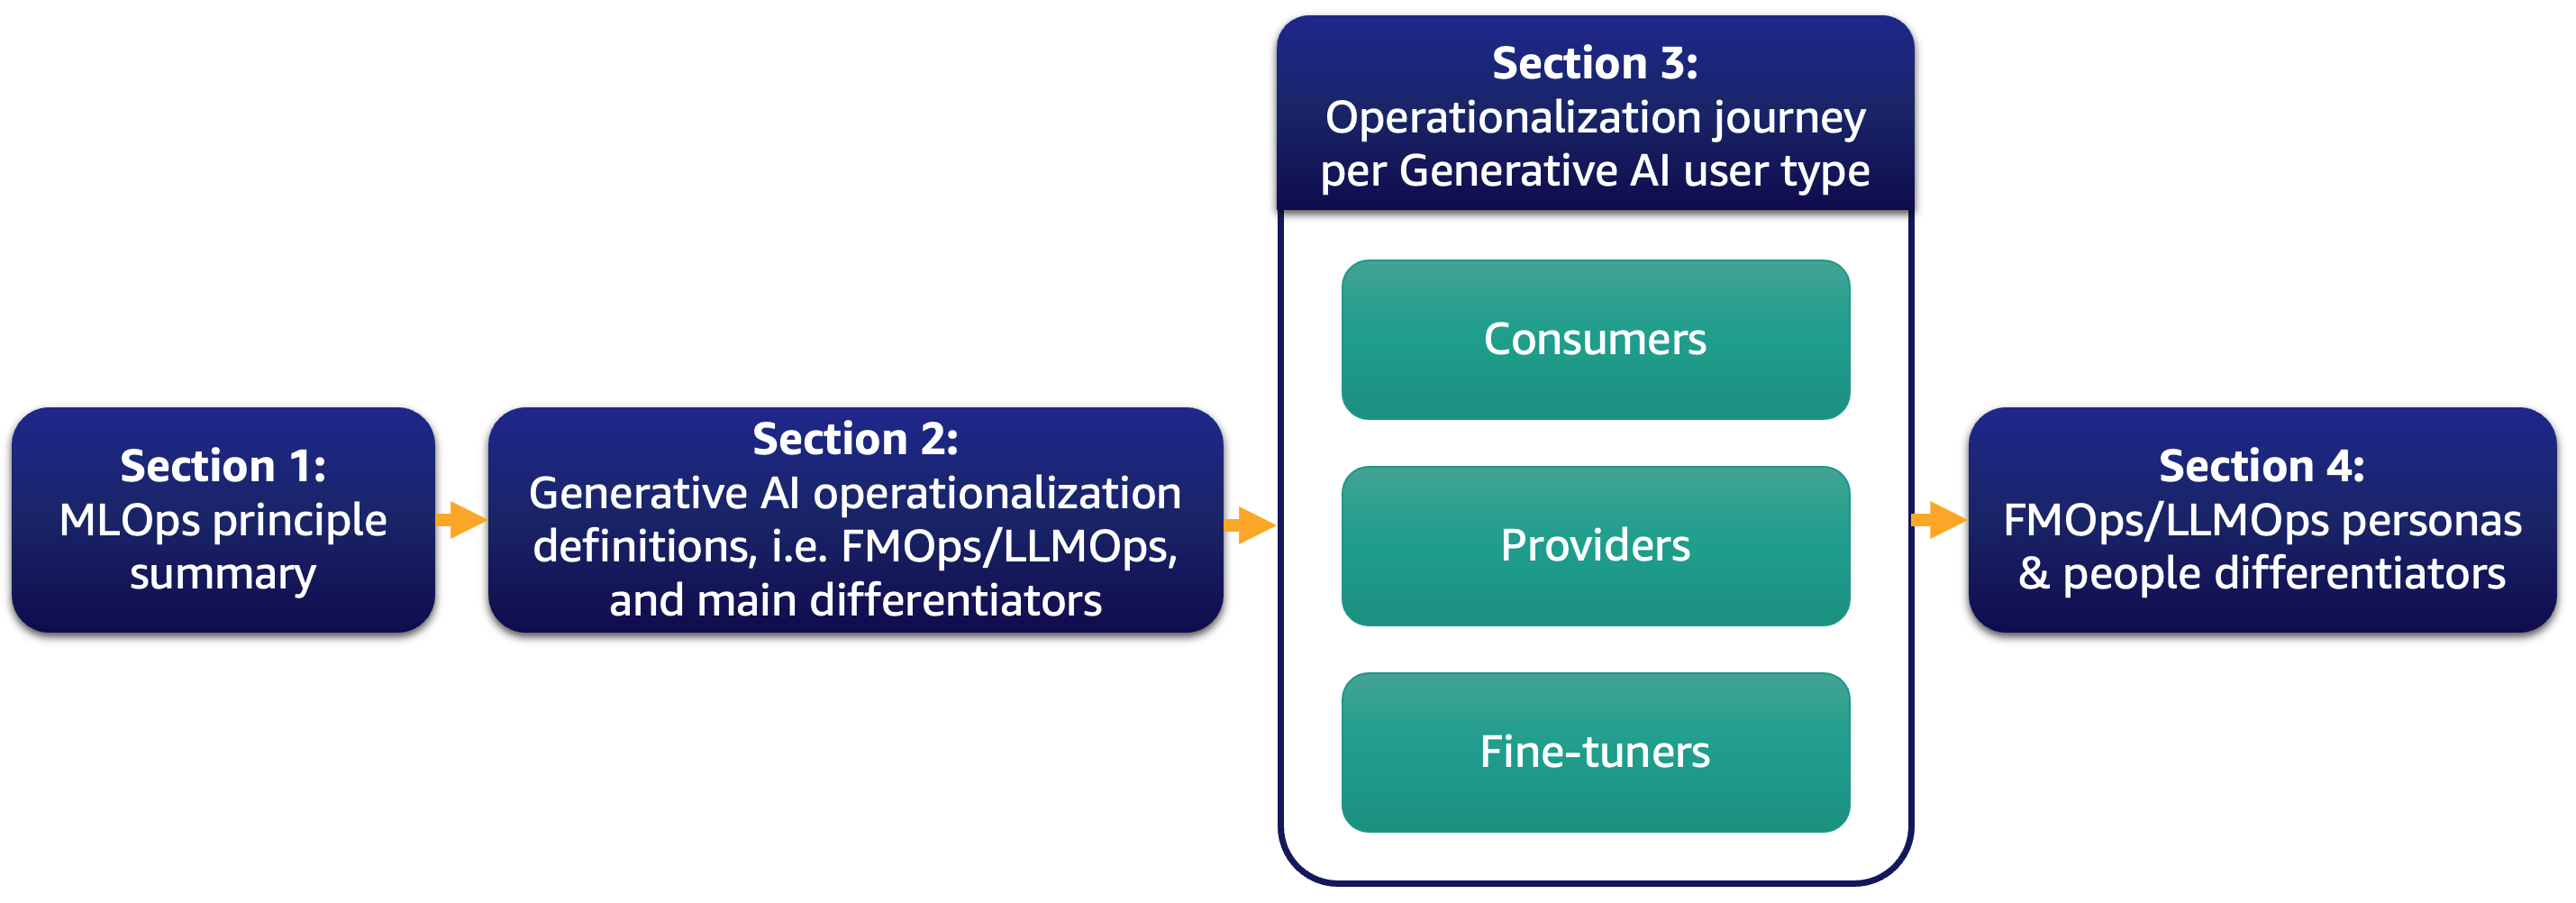 FMOps/LLMOps: Operationalize generative AI and differences with MLOps